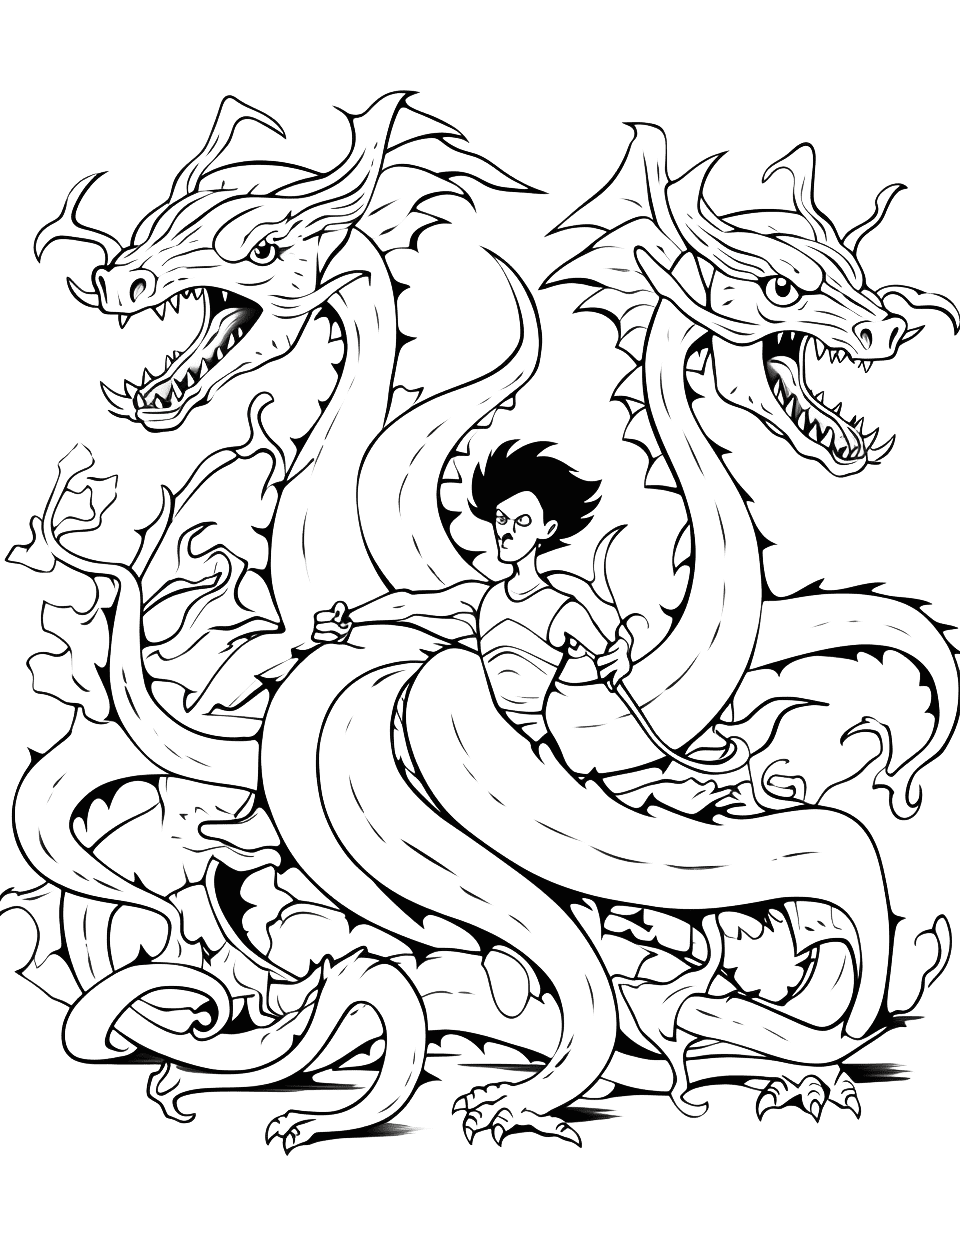 Hydra Battle Coloring Page - A brave hero battling a multi-headed Hydra.